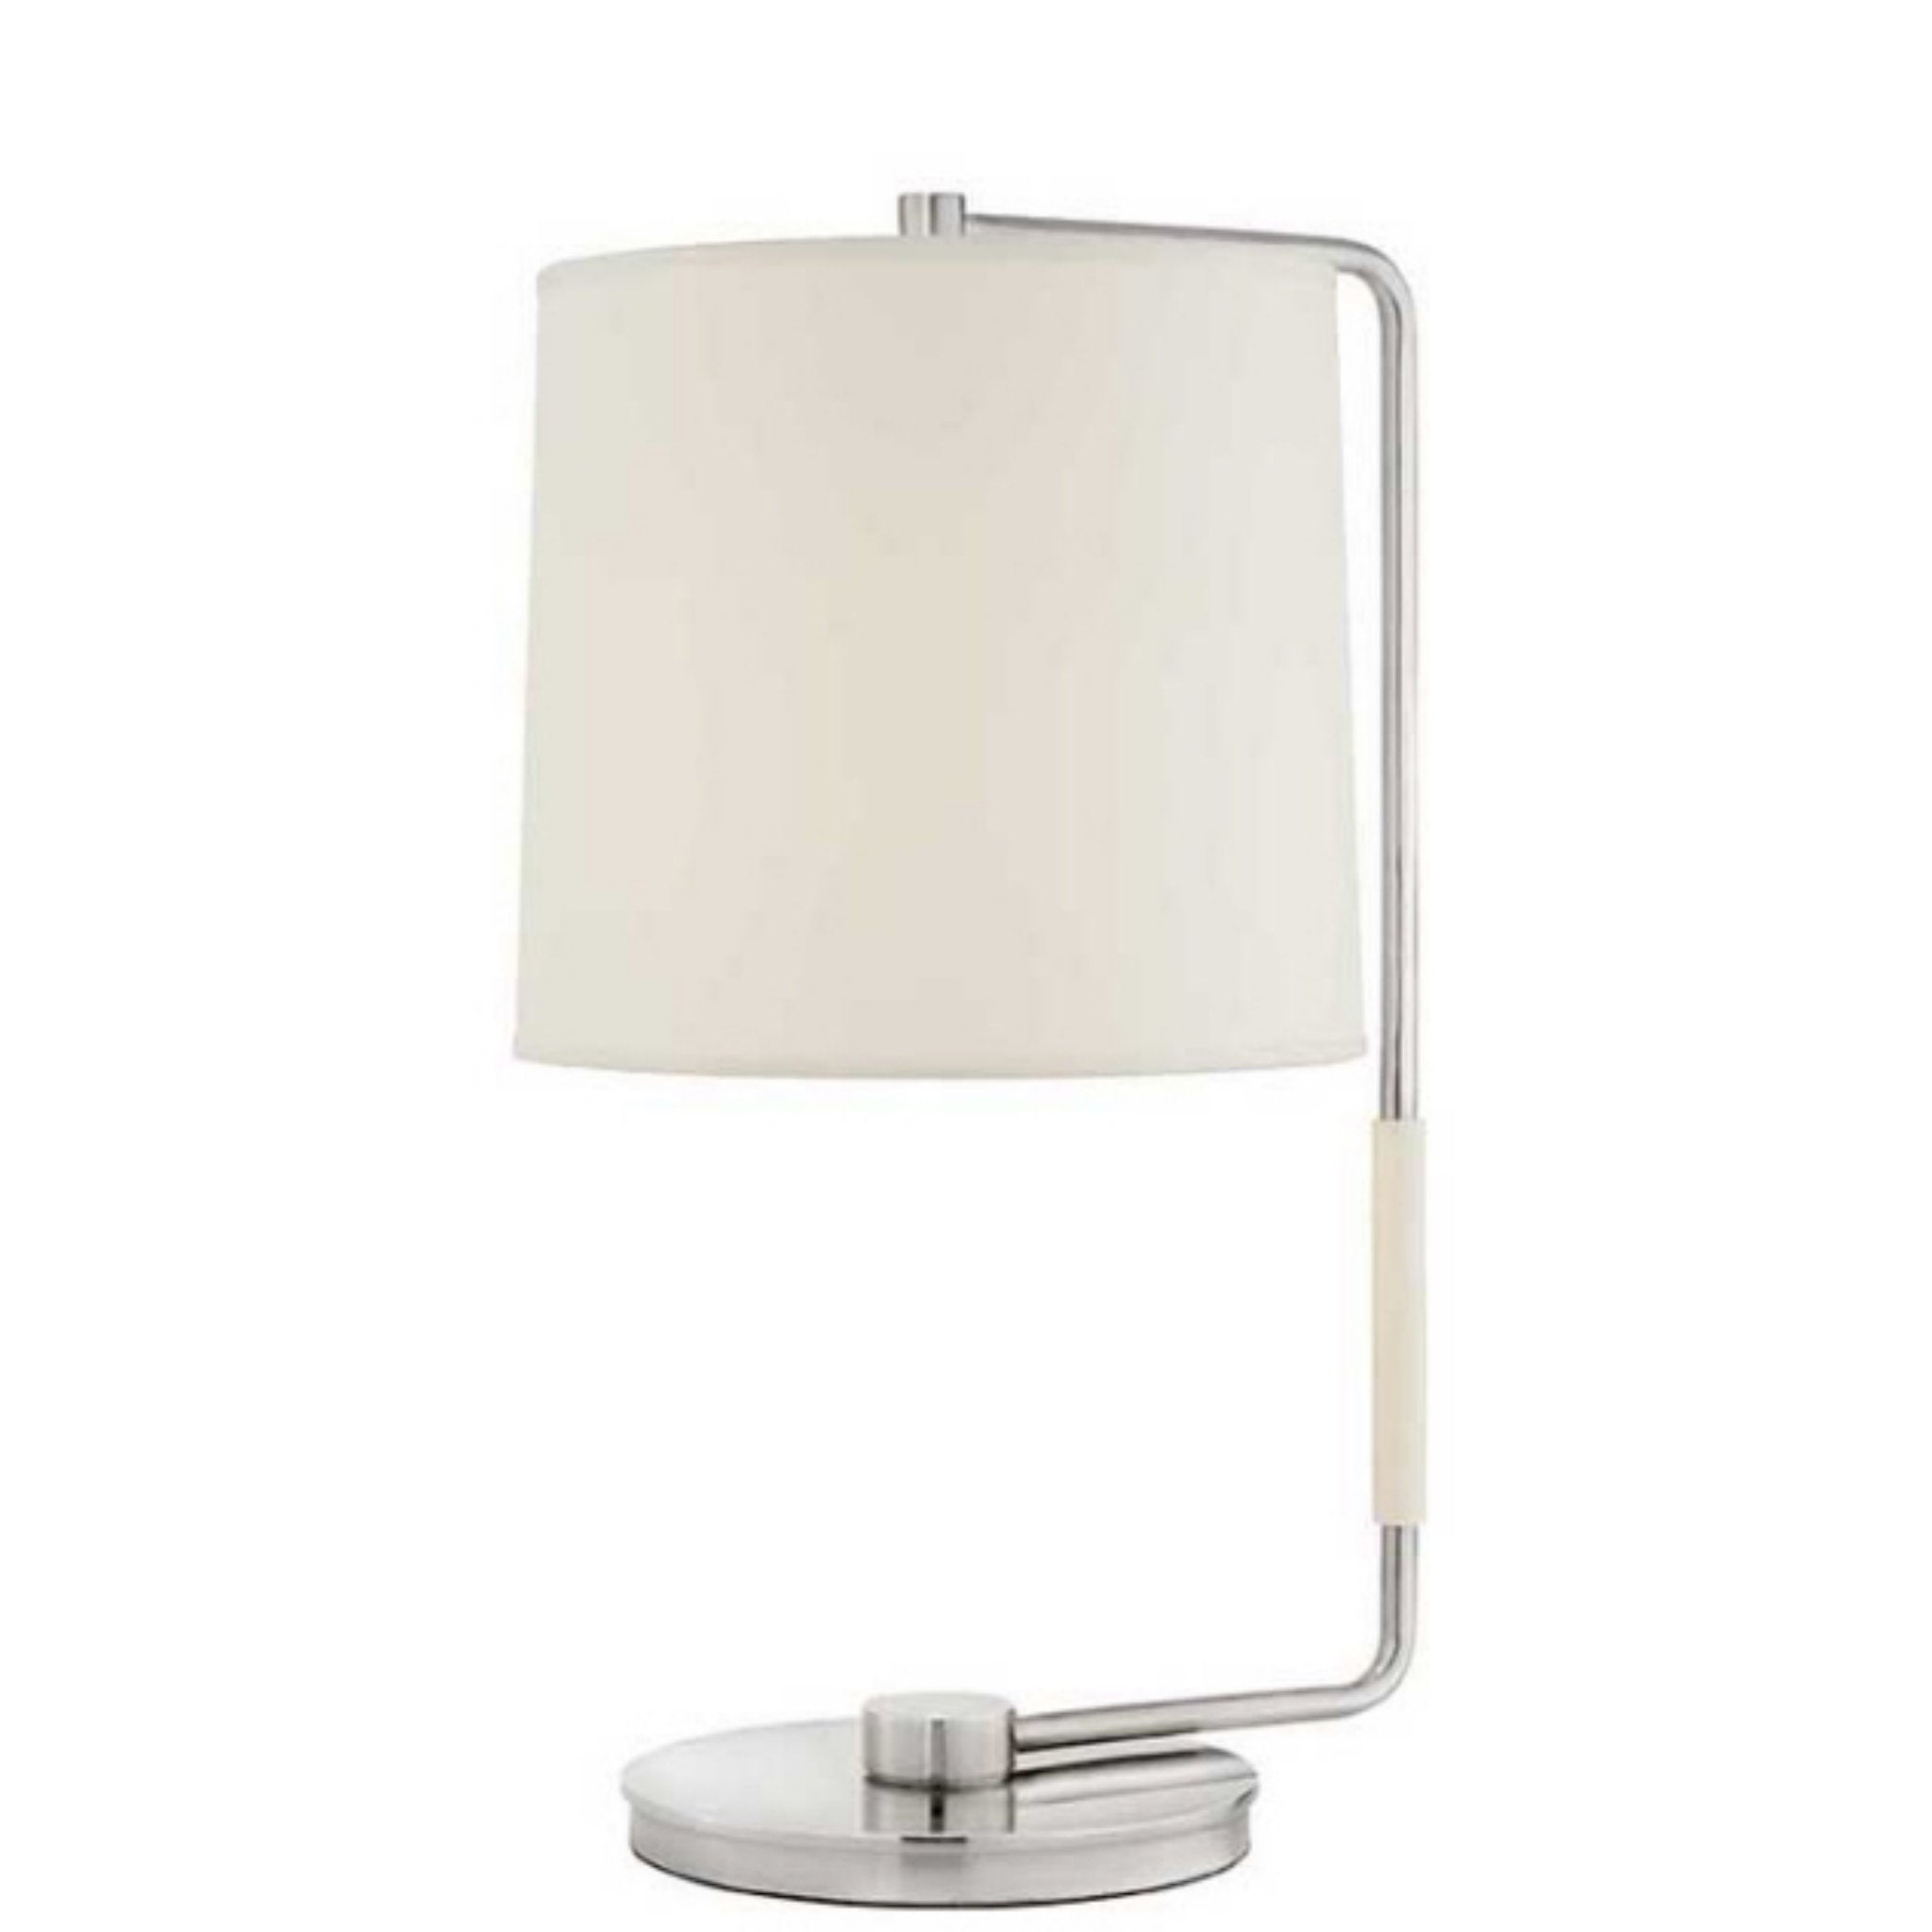 Barbara Barry Swing Table Lamp in Soft Silver with Silk Shade